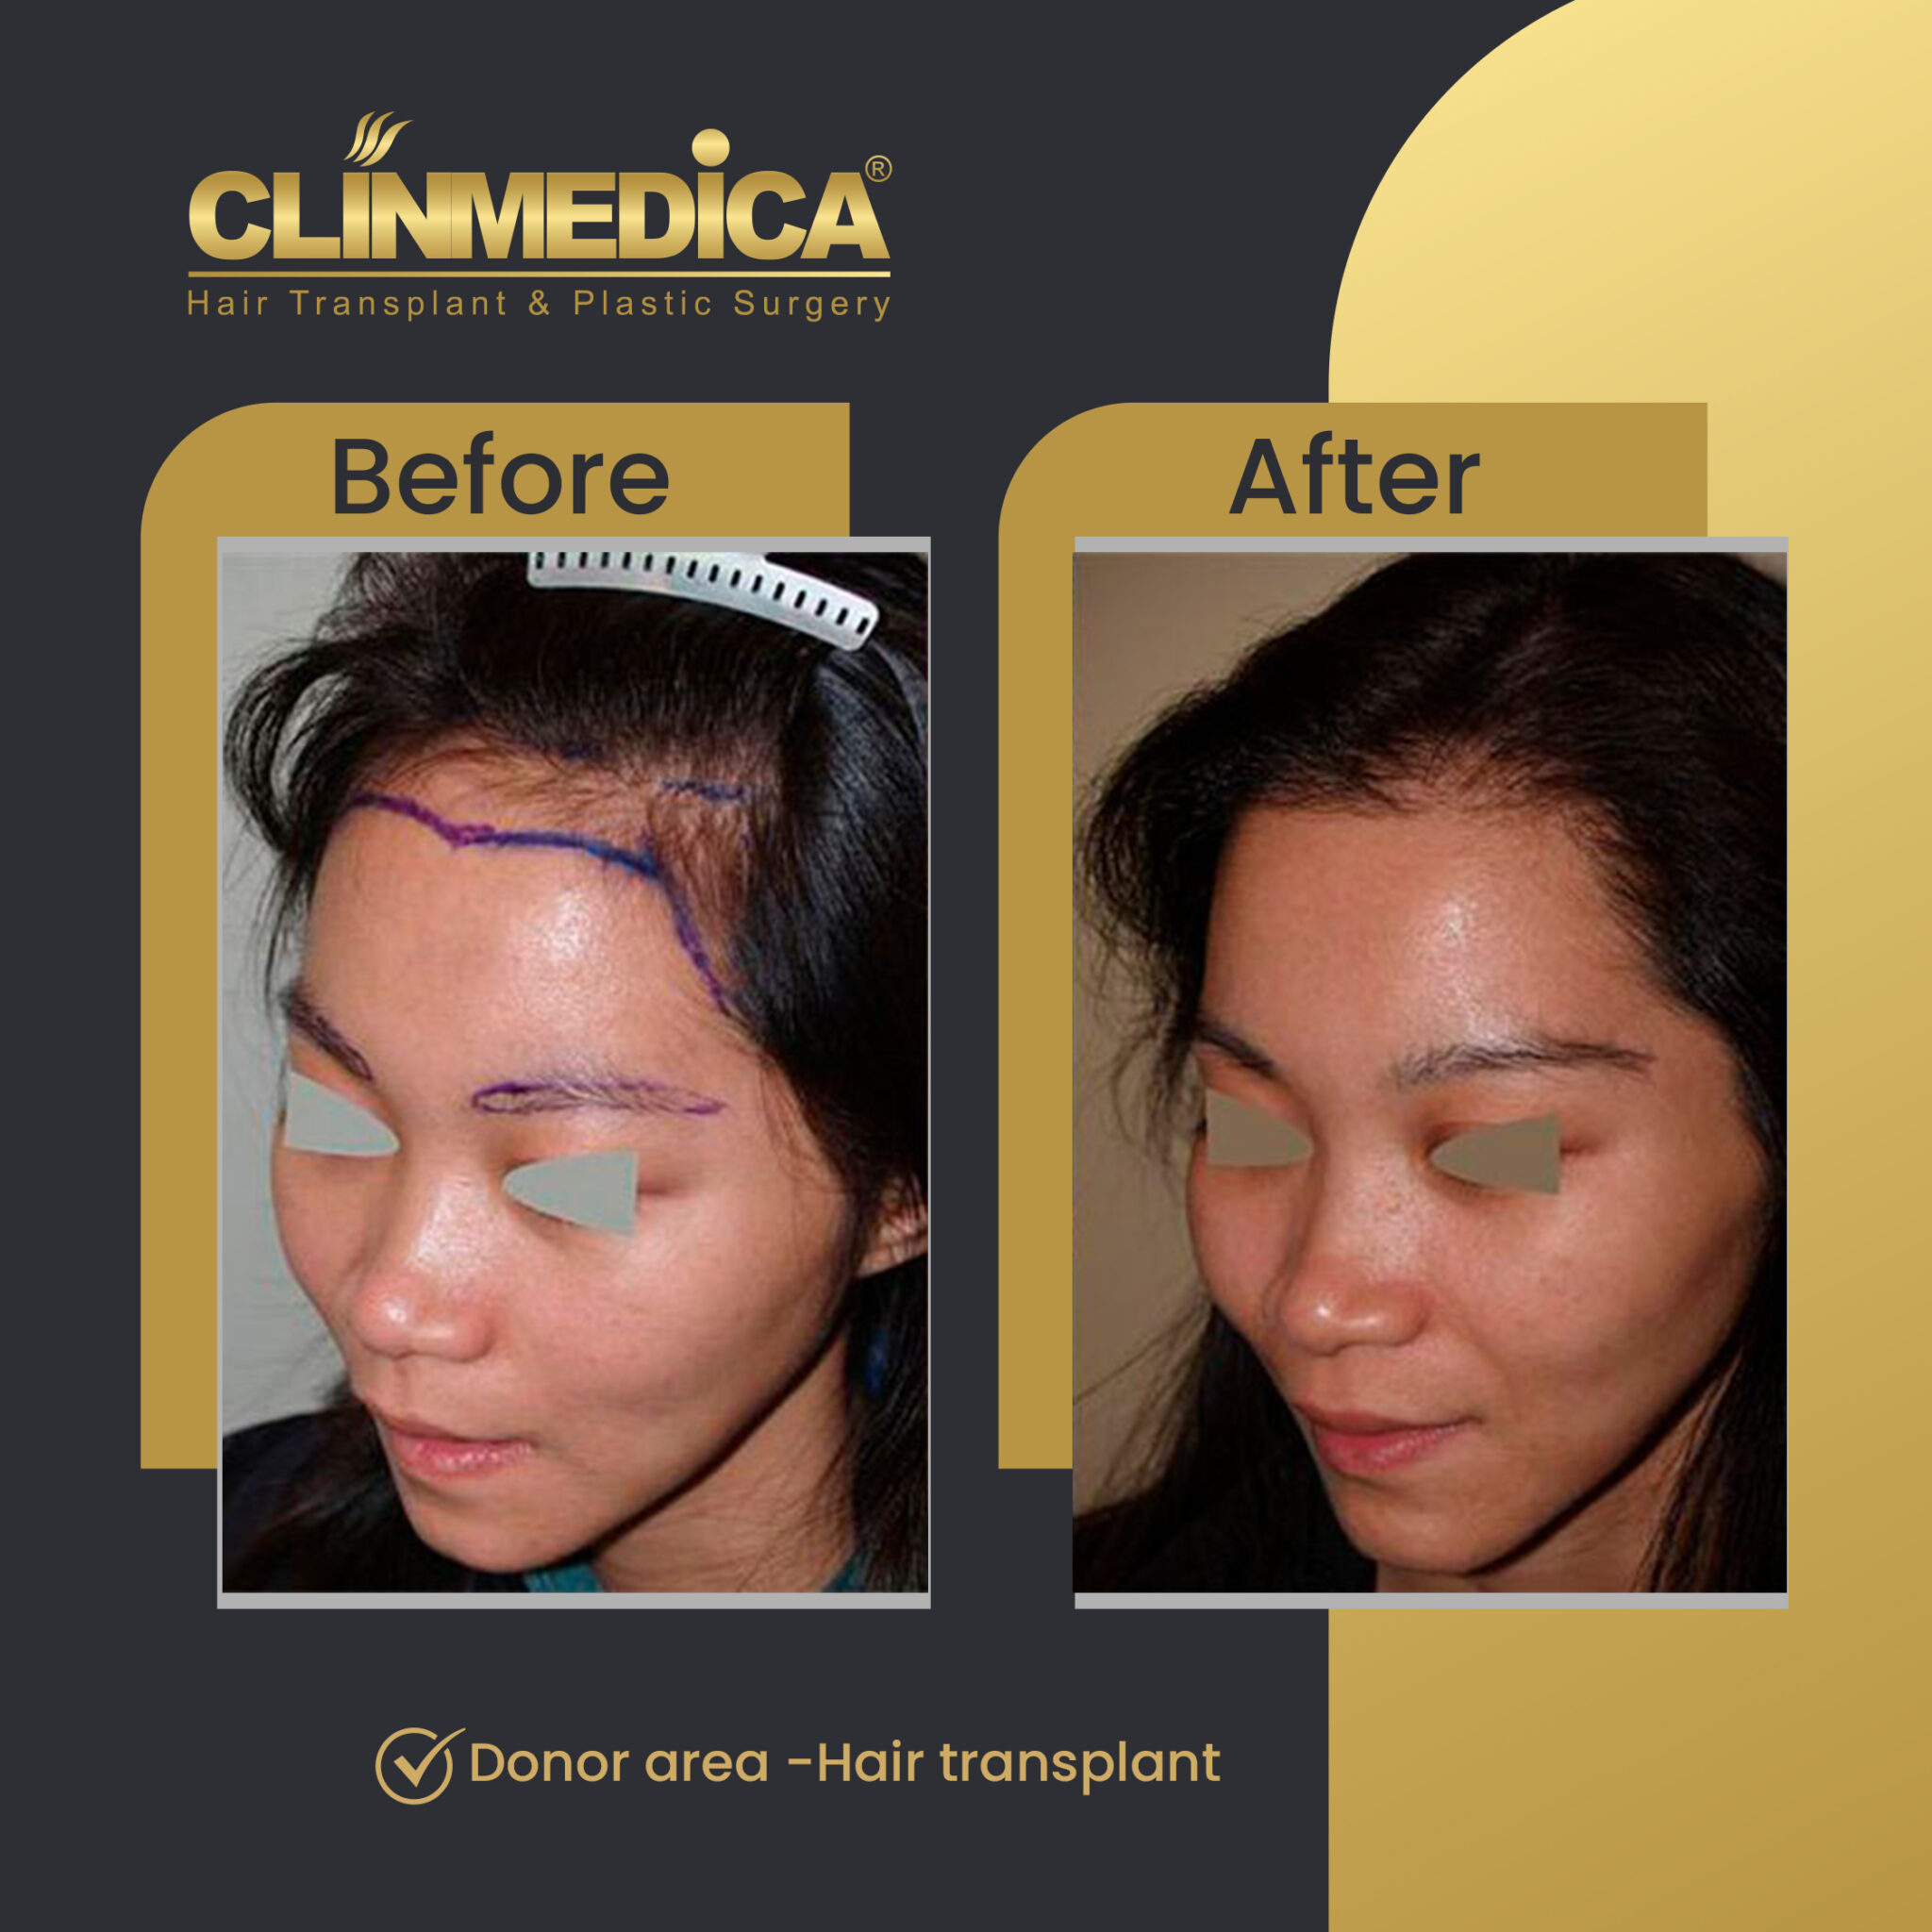 Hair-Transplant-for-women-Before-&-After-clinmedica-22.jpg-